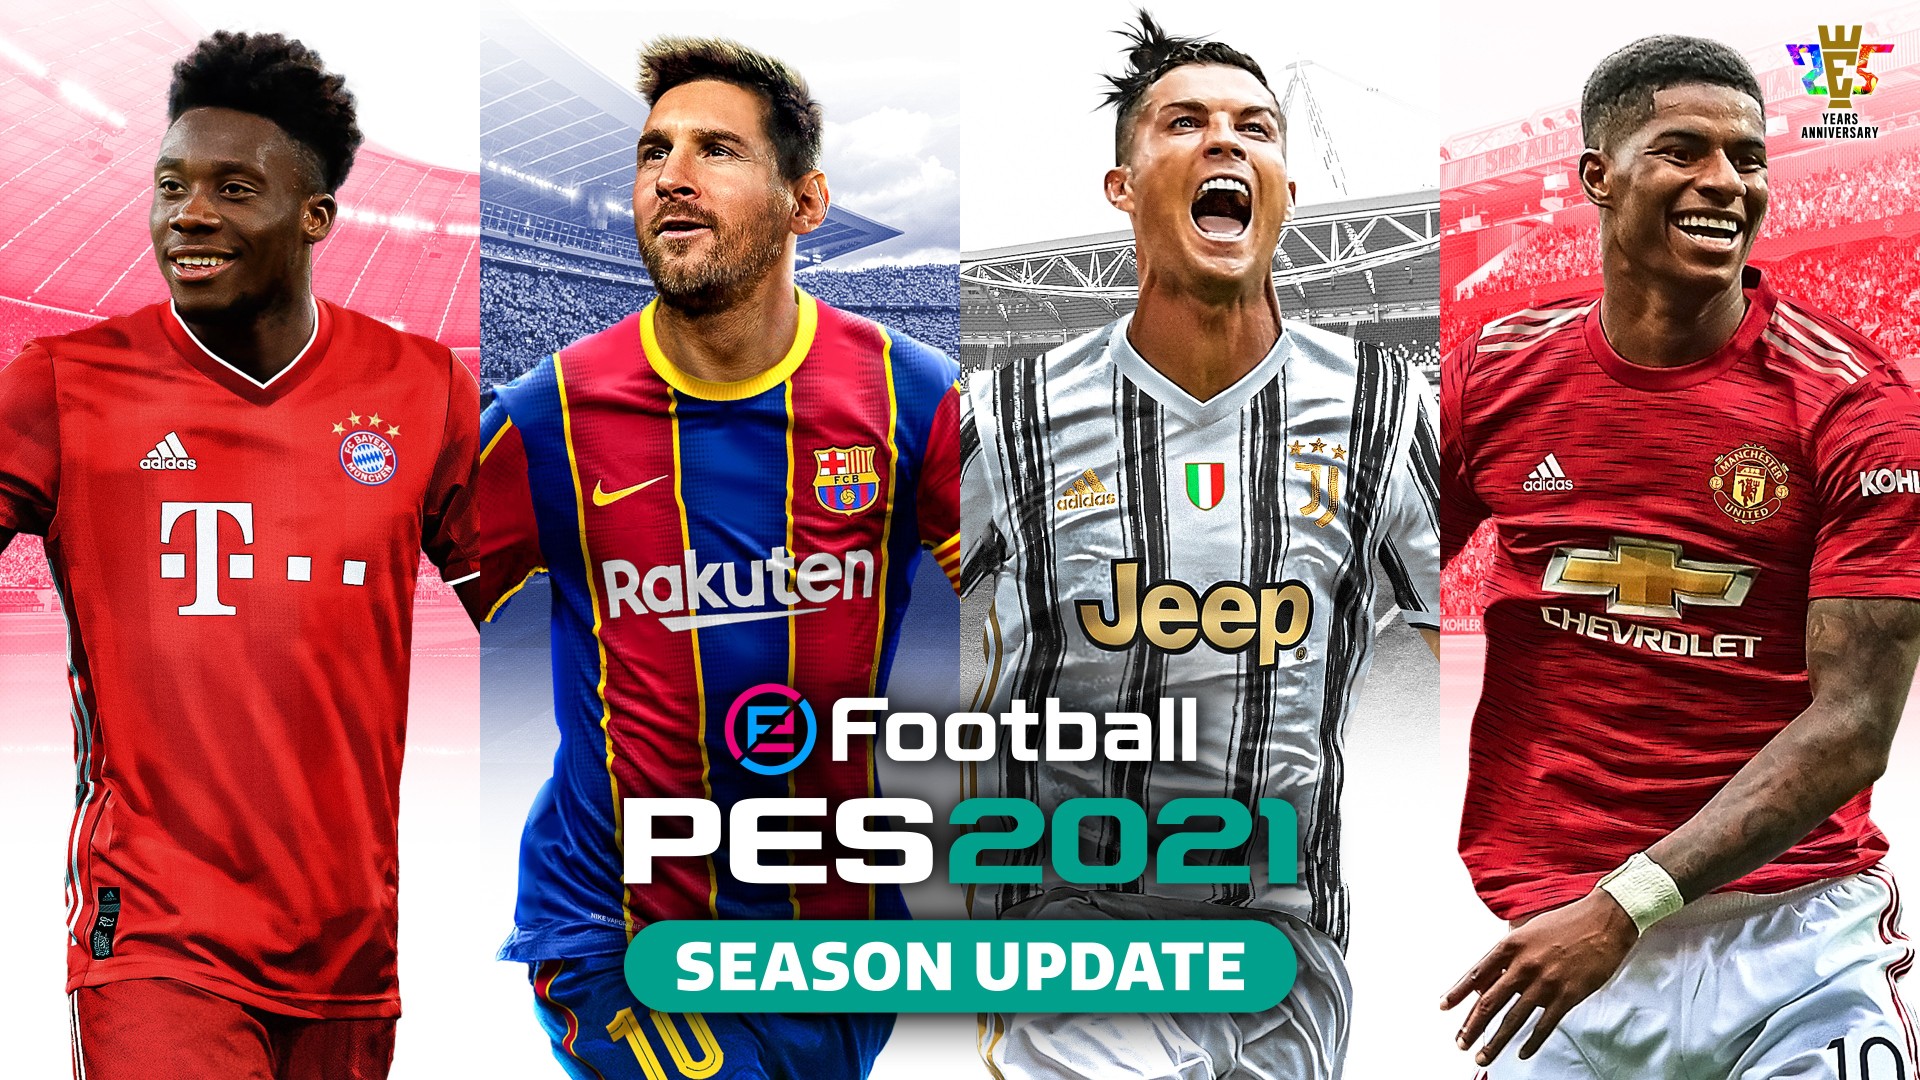 Voorwaarden Monografie scheepsbouw Soccer Icons Messi and Ronaldo Make History in the 25th Year Anniversary of  the PES Franchise - Xbox Wire